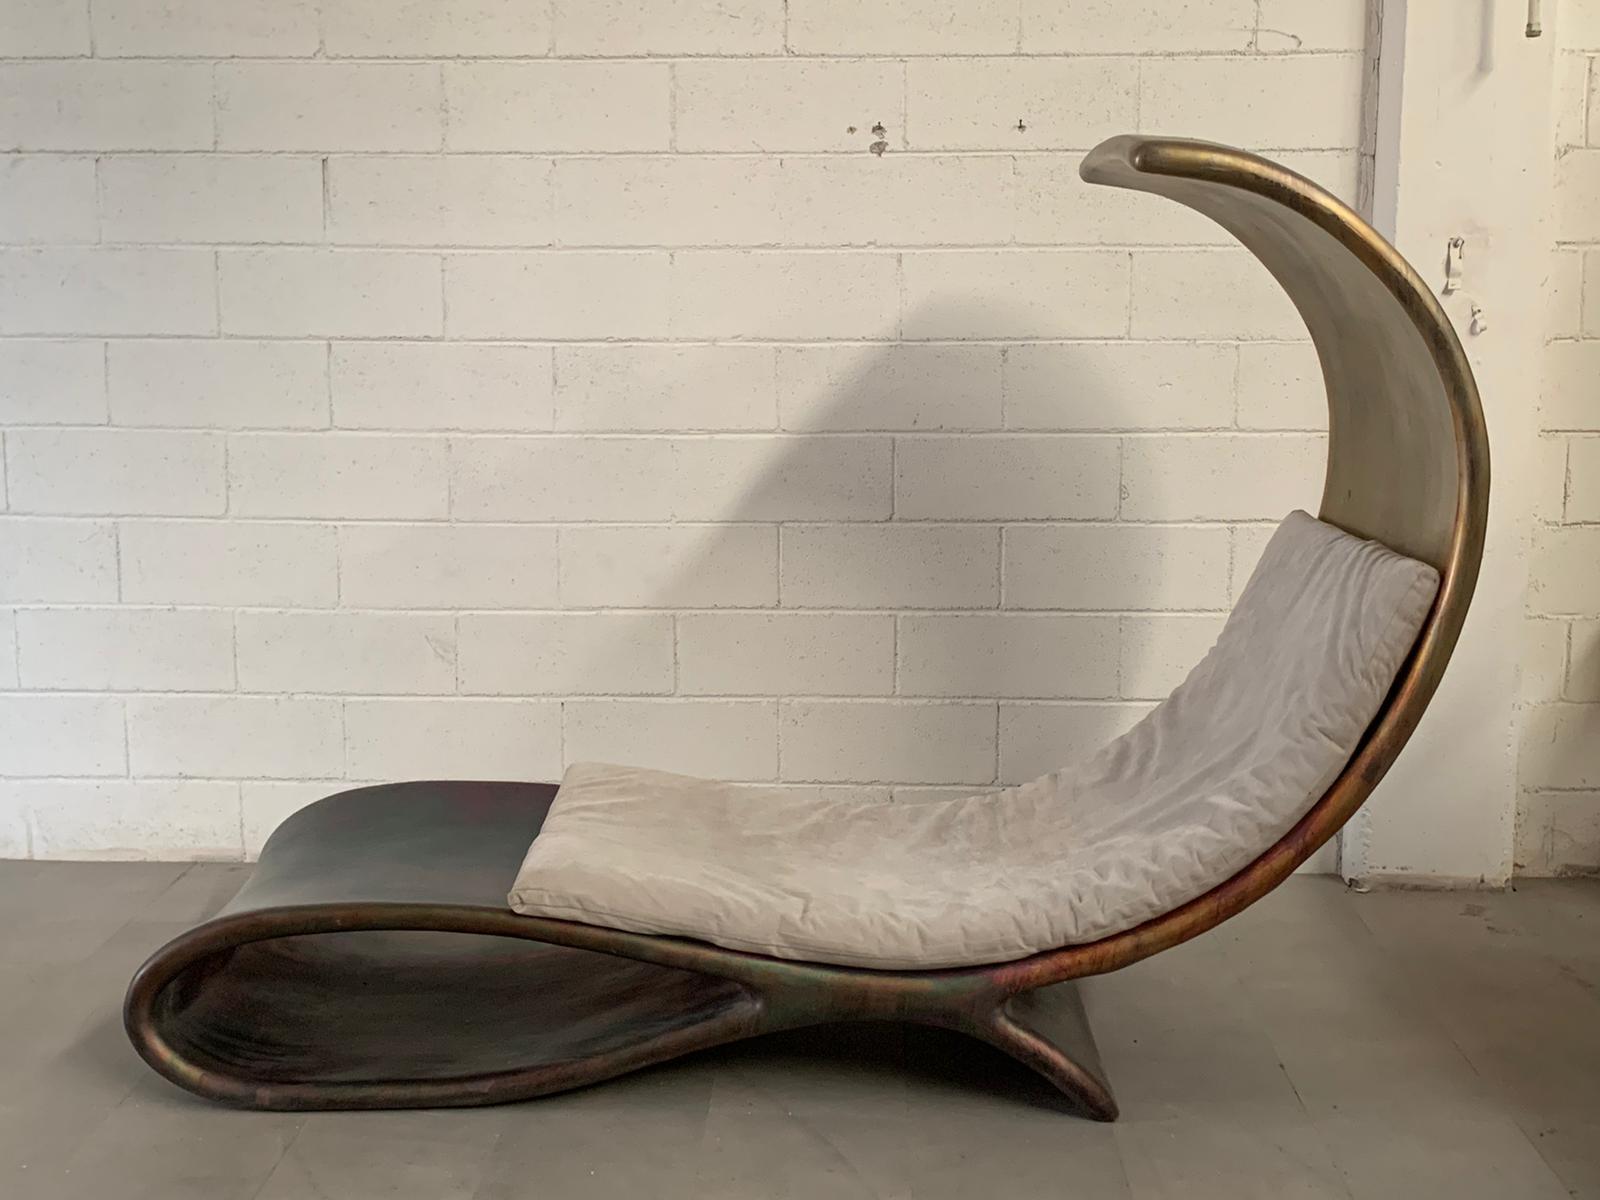 Chaise longue designed by Ravi Sing, produced by lightworks resorce in 1998. Glass fibre coated in patinated copper.
Packaging with bubble wrap and cardboard boxes is included. If the wooden packaging is needed (crates or boxes) for US and